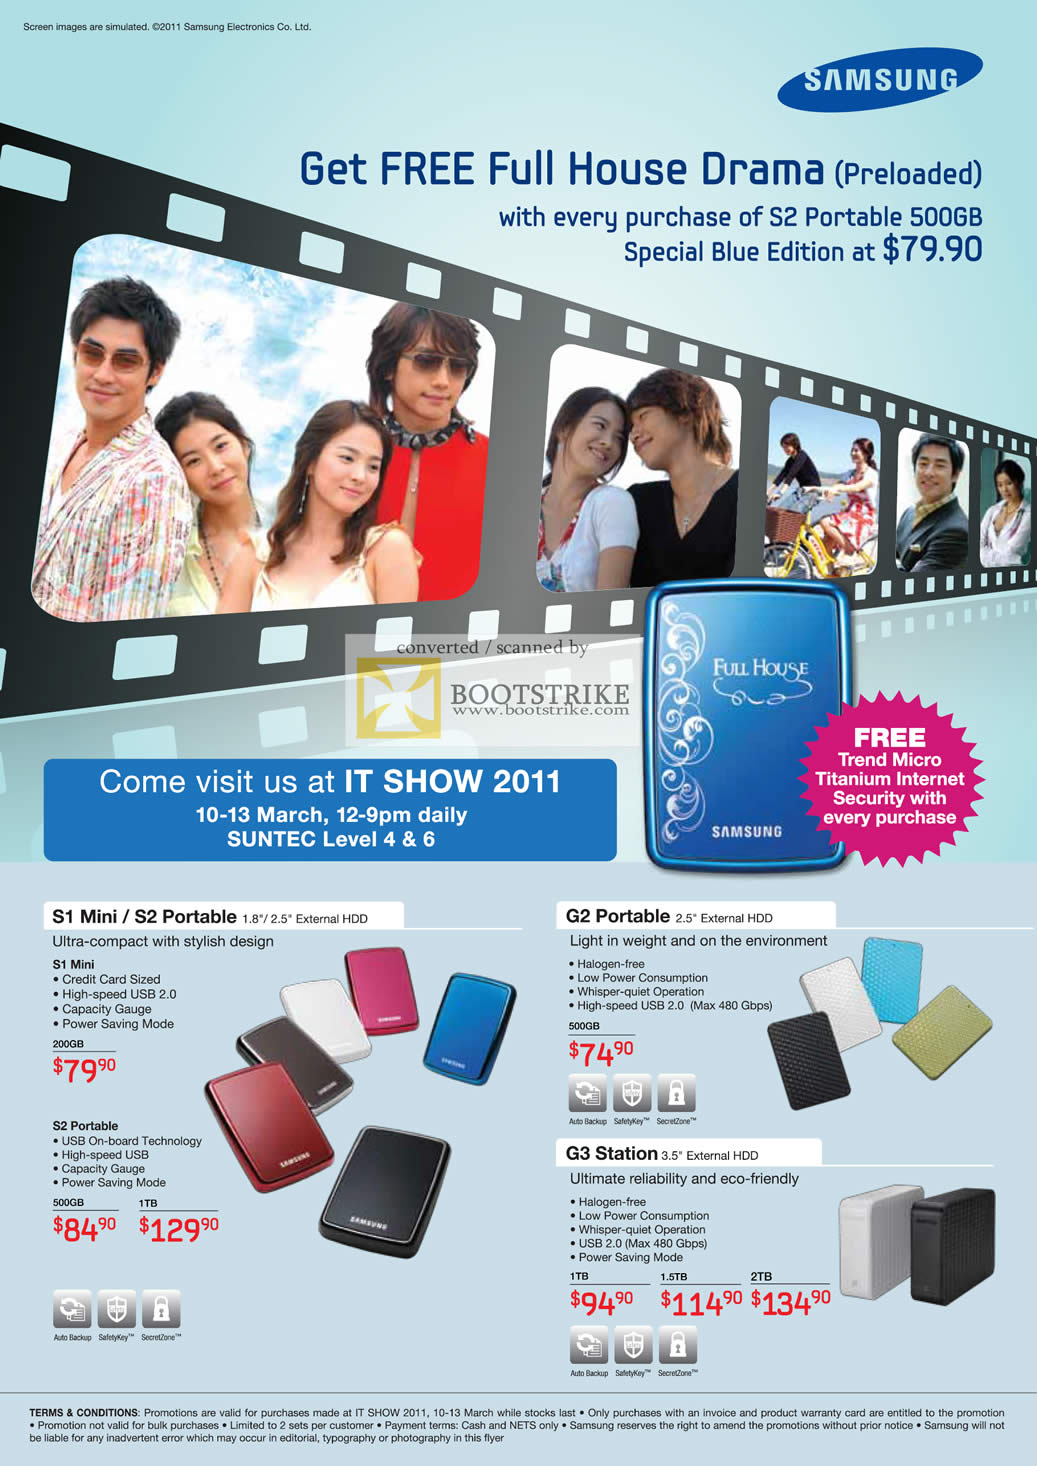 IT Show 2011 price list image brochure of Samsung External Storage HDD S1 Mini S2 Portable G2 Portable G3 Station